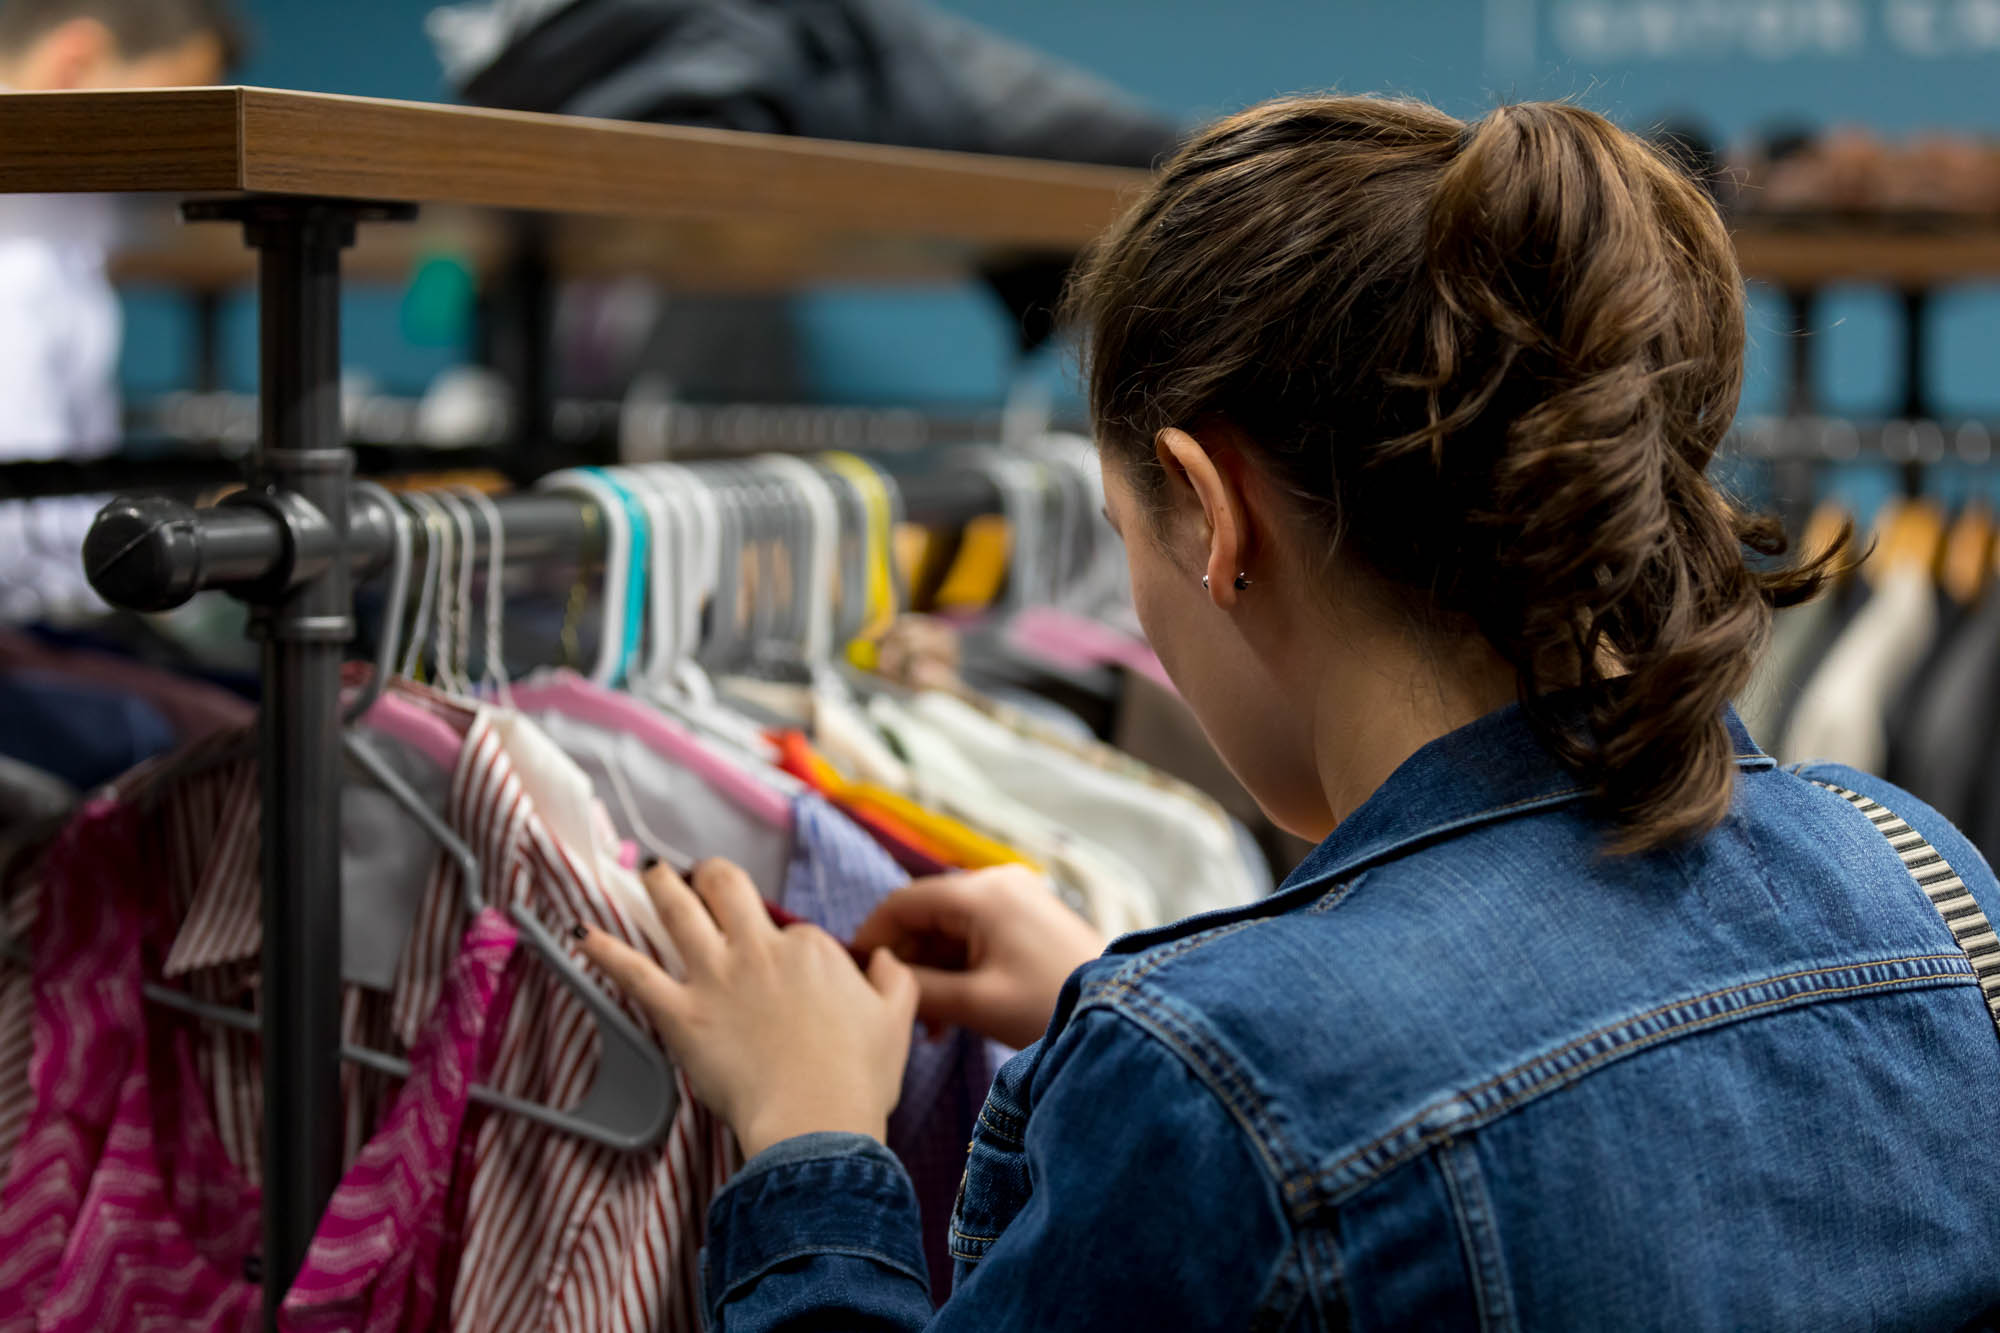 A student looks through a rack of clothes in search of a great outfit for their interview.